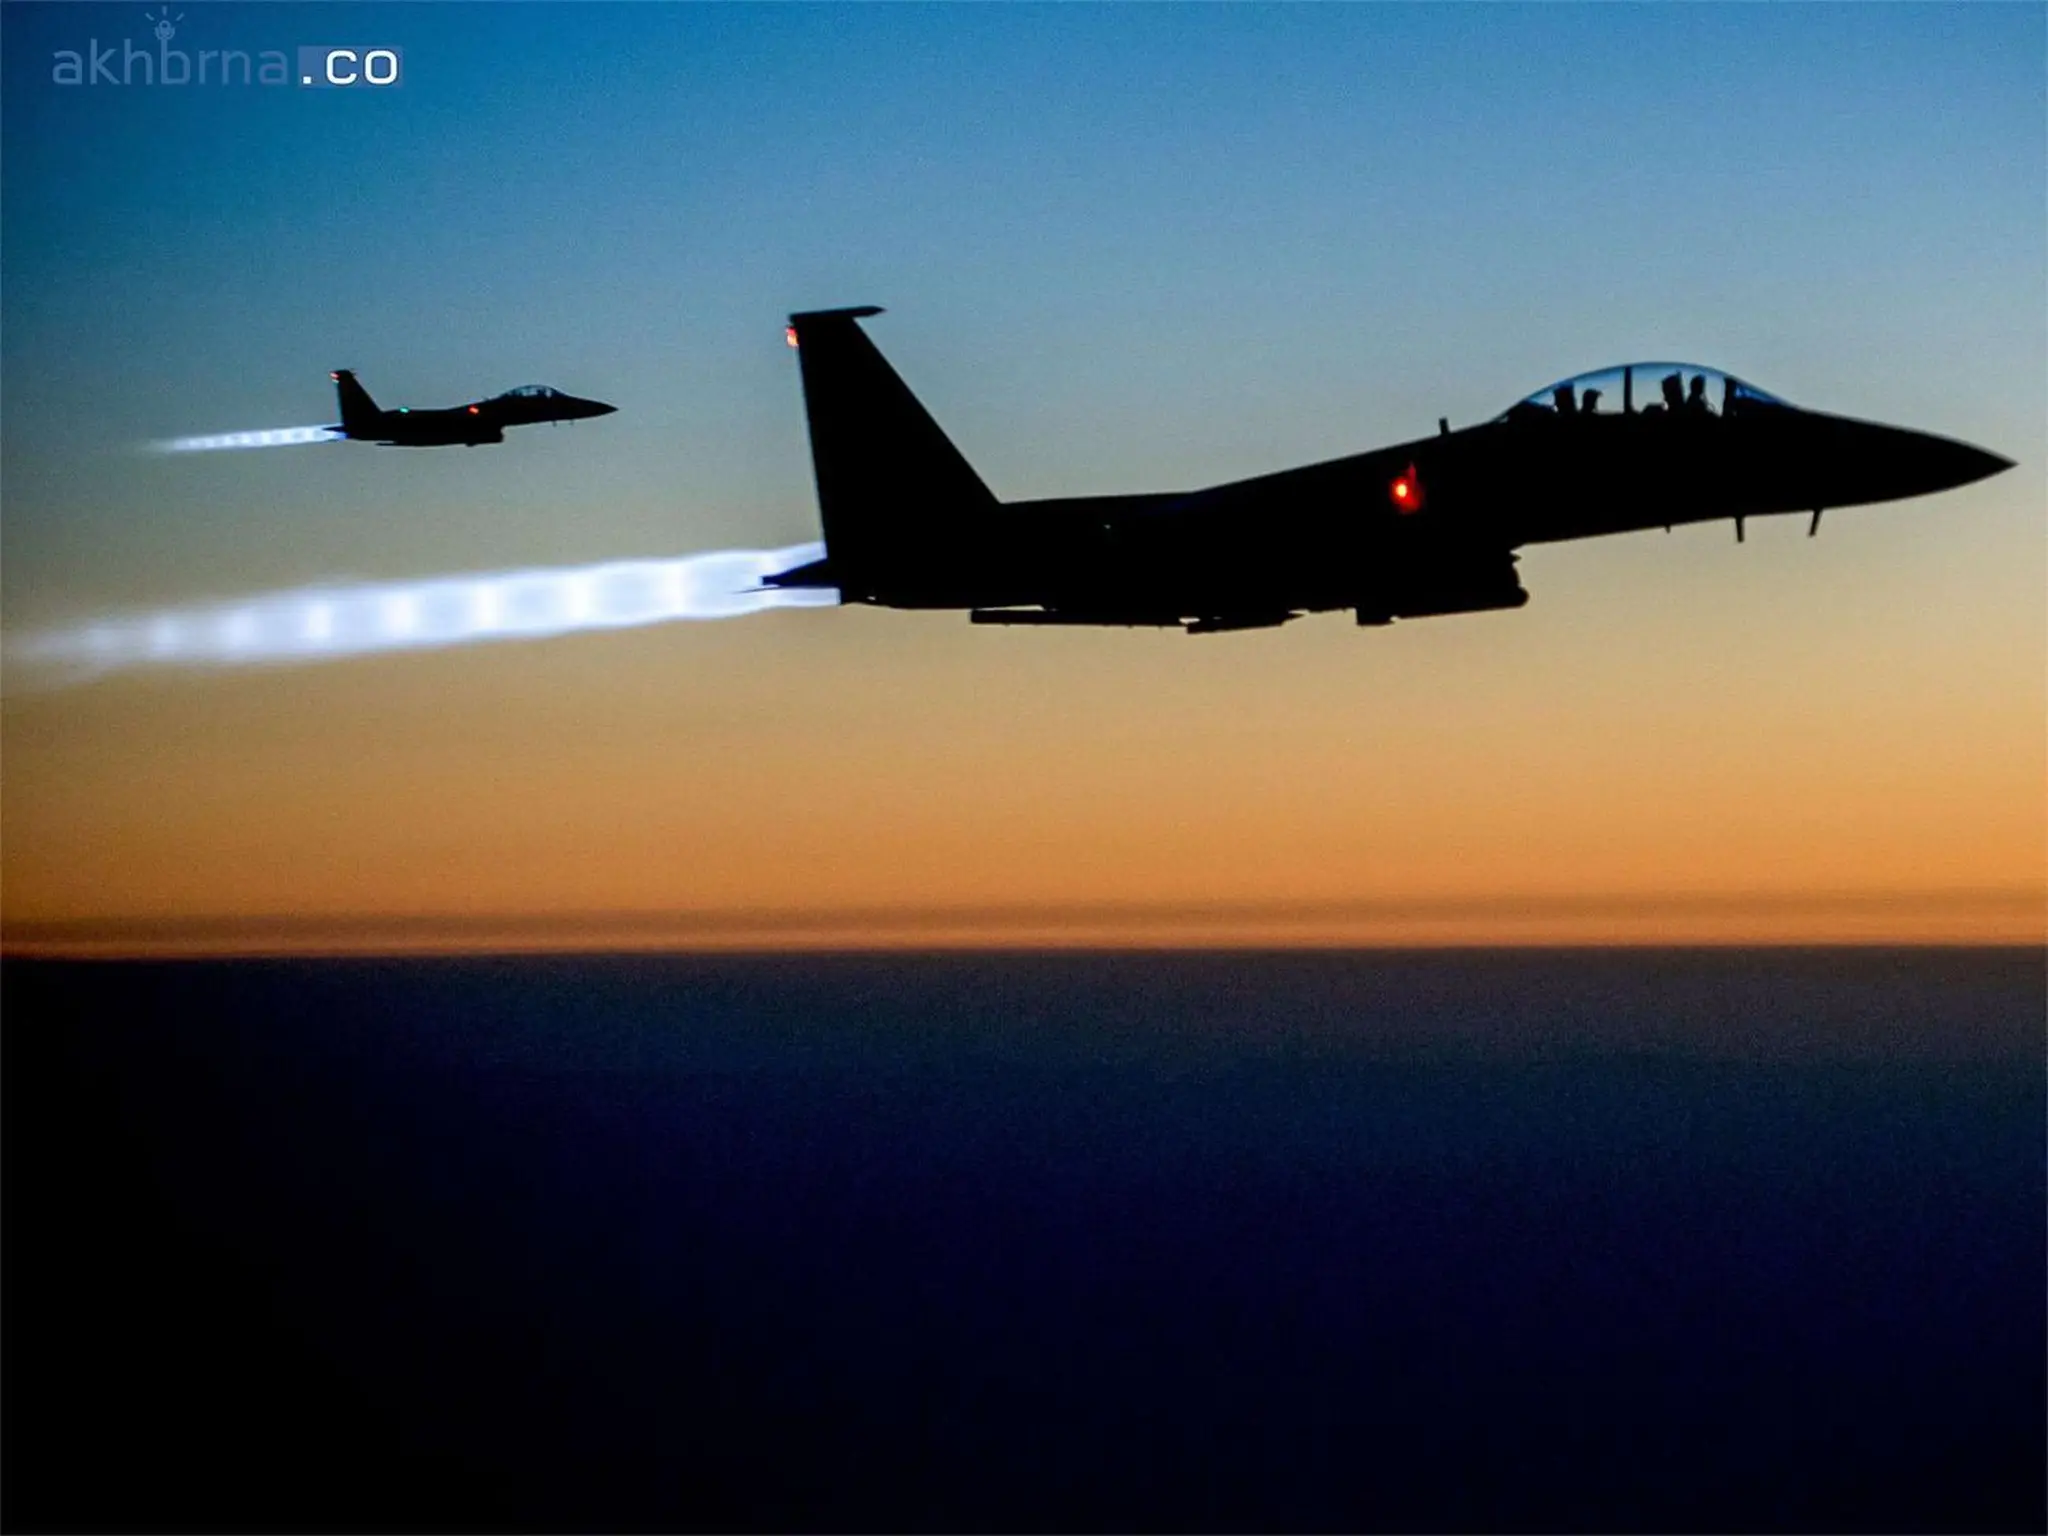 US launched airstrikes in Iraq and killed 16 people, including civilians